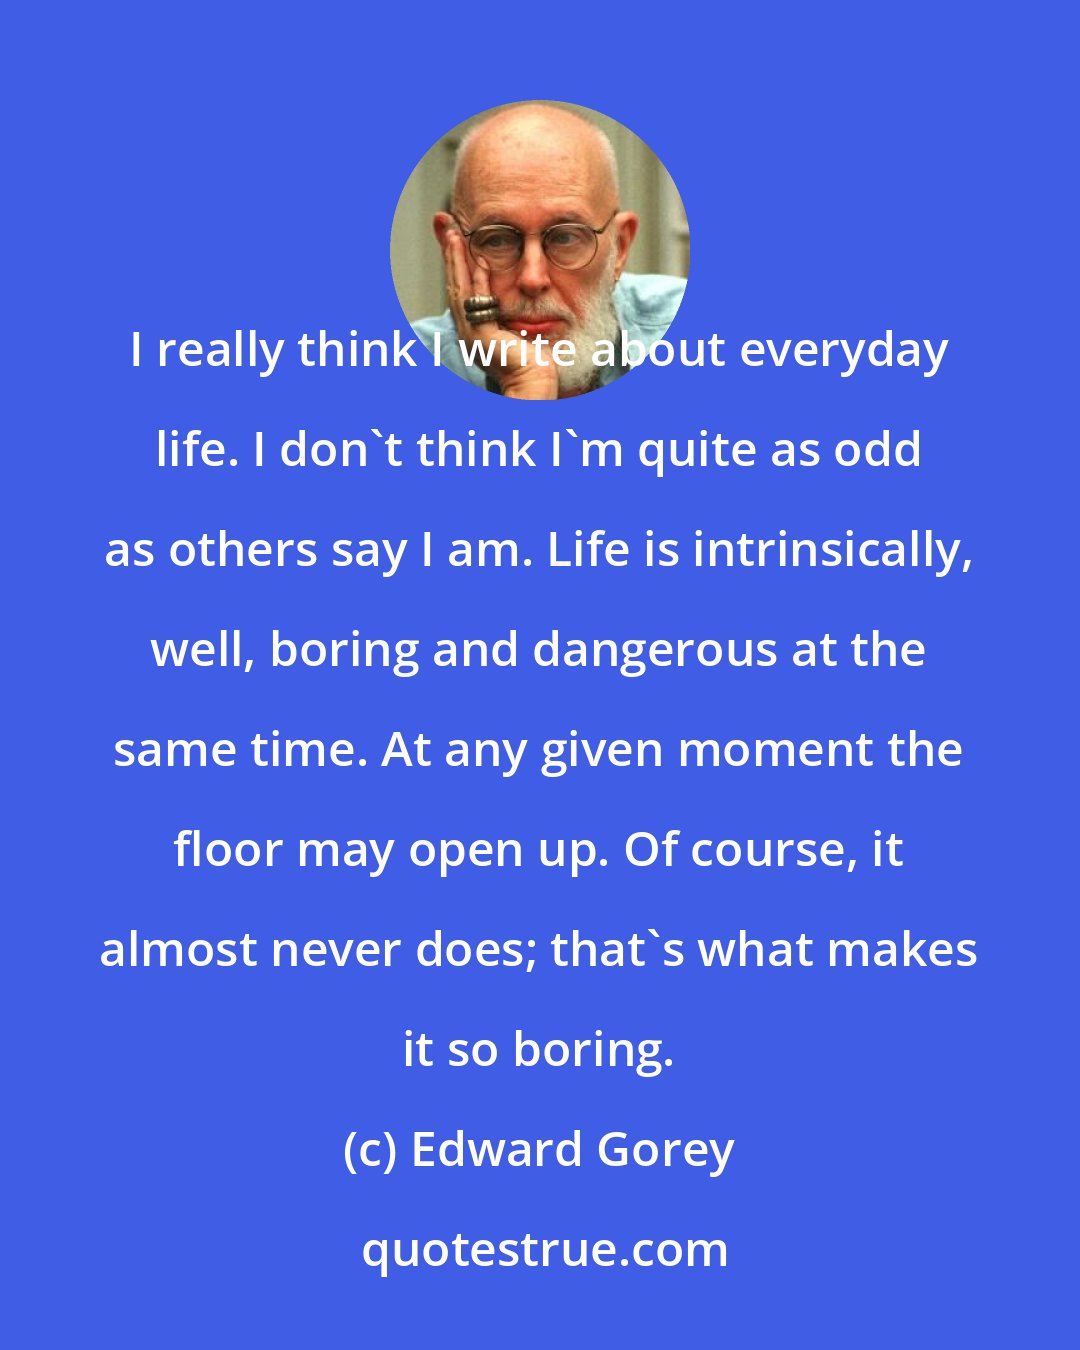 Edward Gorey: I really think I write about everyday life. I don't think I'm quite as odd as others say I am. Life is intrinsically, well, boring and dangerous at the same time. At any given moment the floor may open up. Of course, it almost never does; that's what makes it so boring.